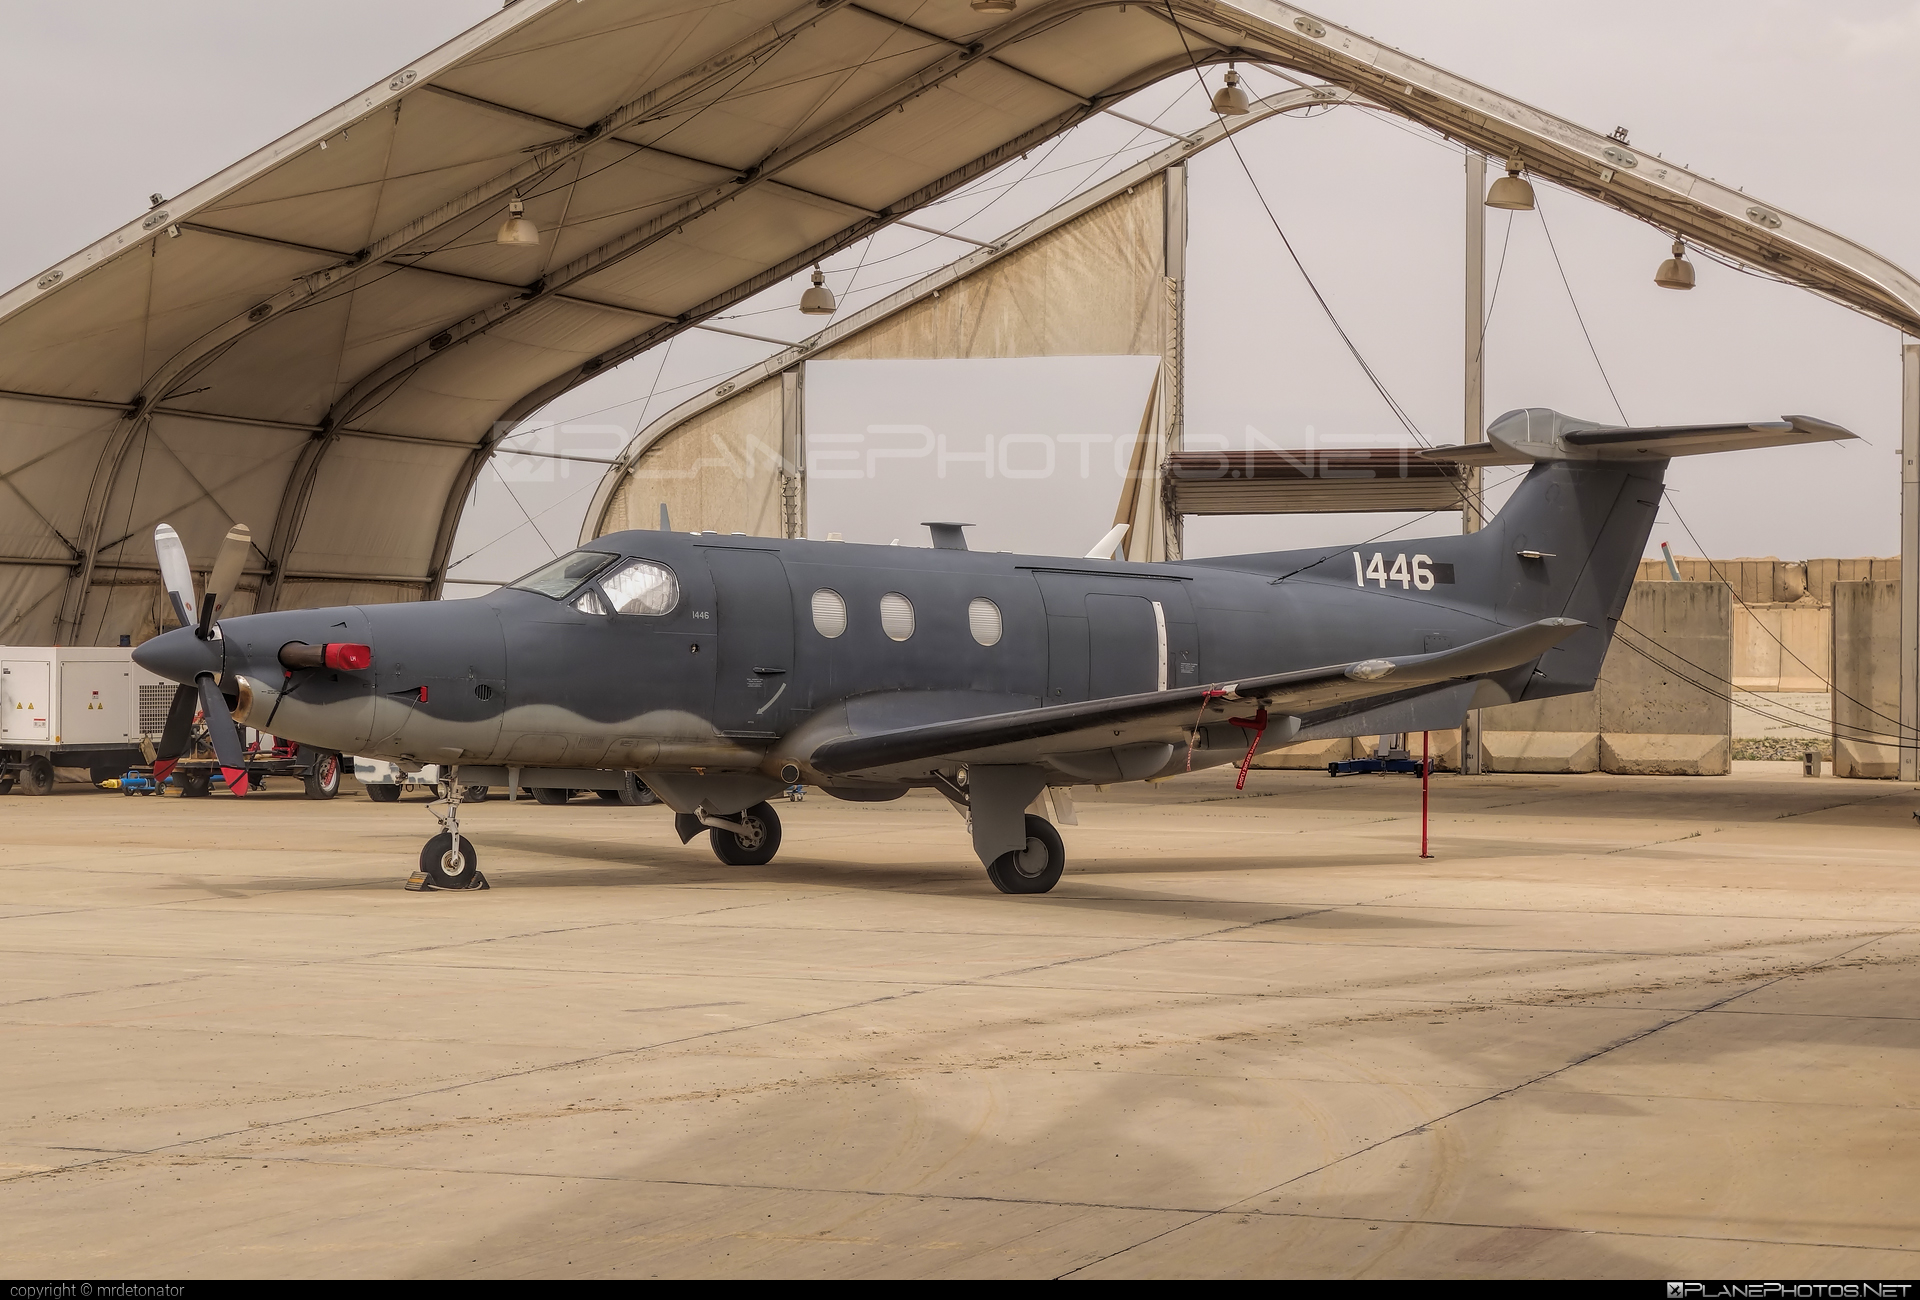 Pilatus PC-12 - YA1446 operated by Afghan Air Force #afghanairforce #pc12 #pilatus #pilatuspc12